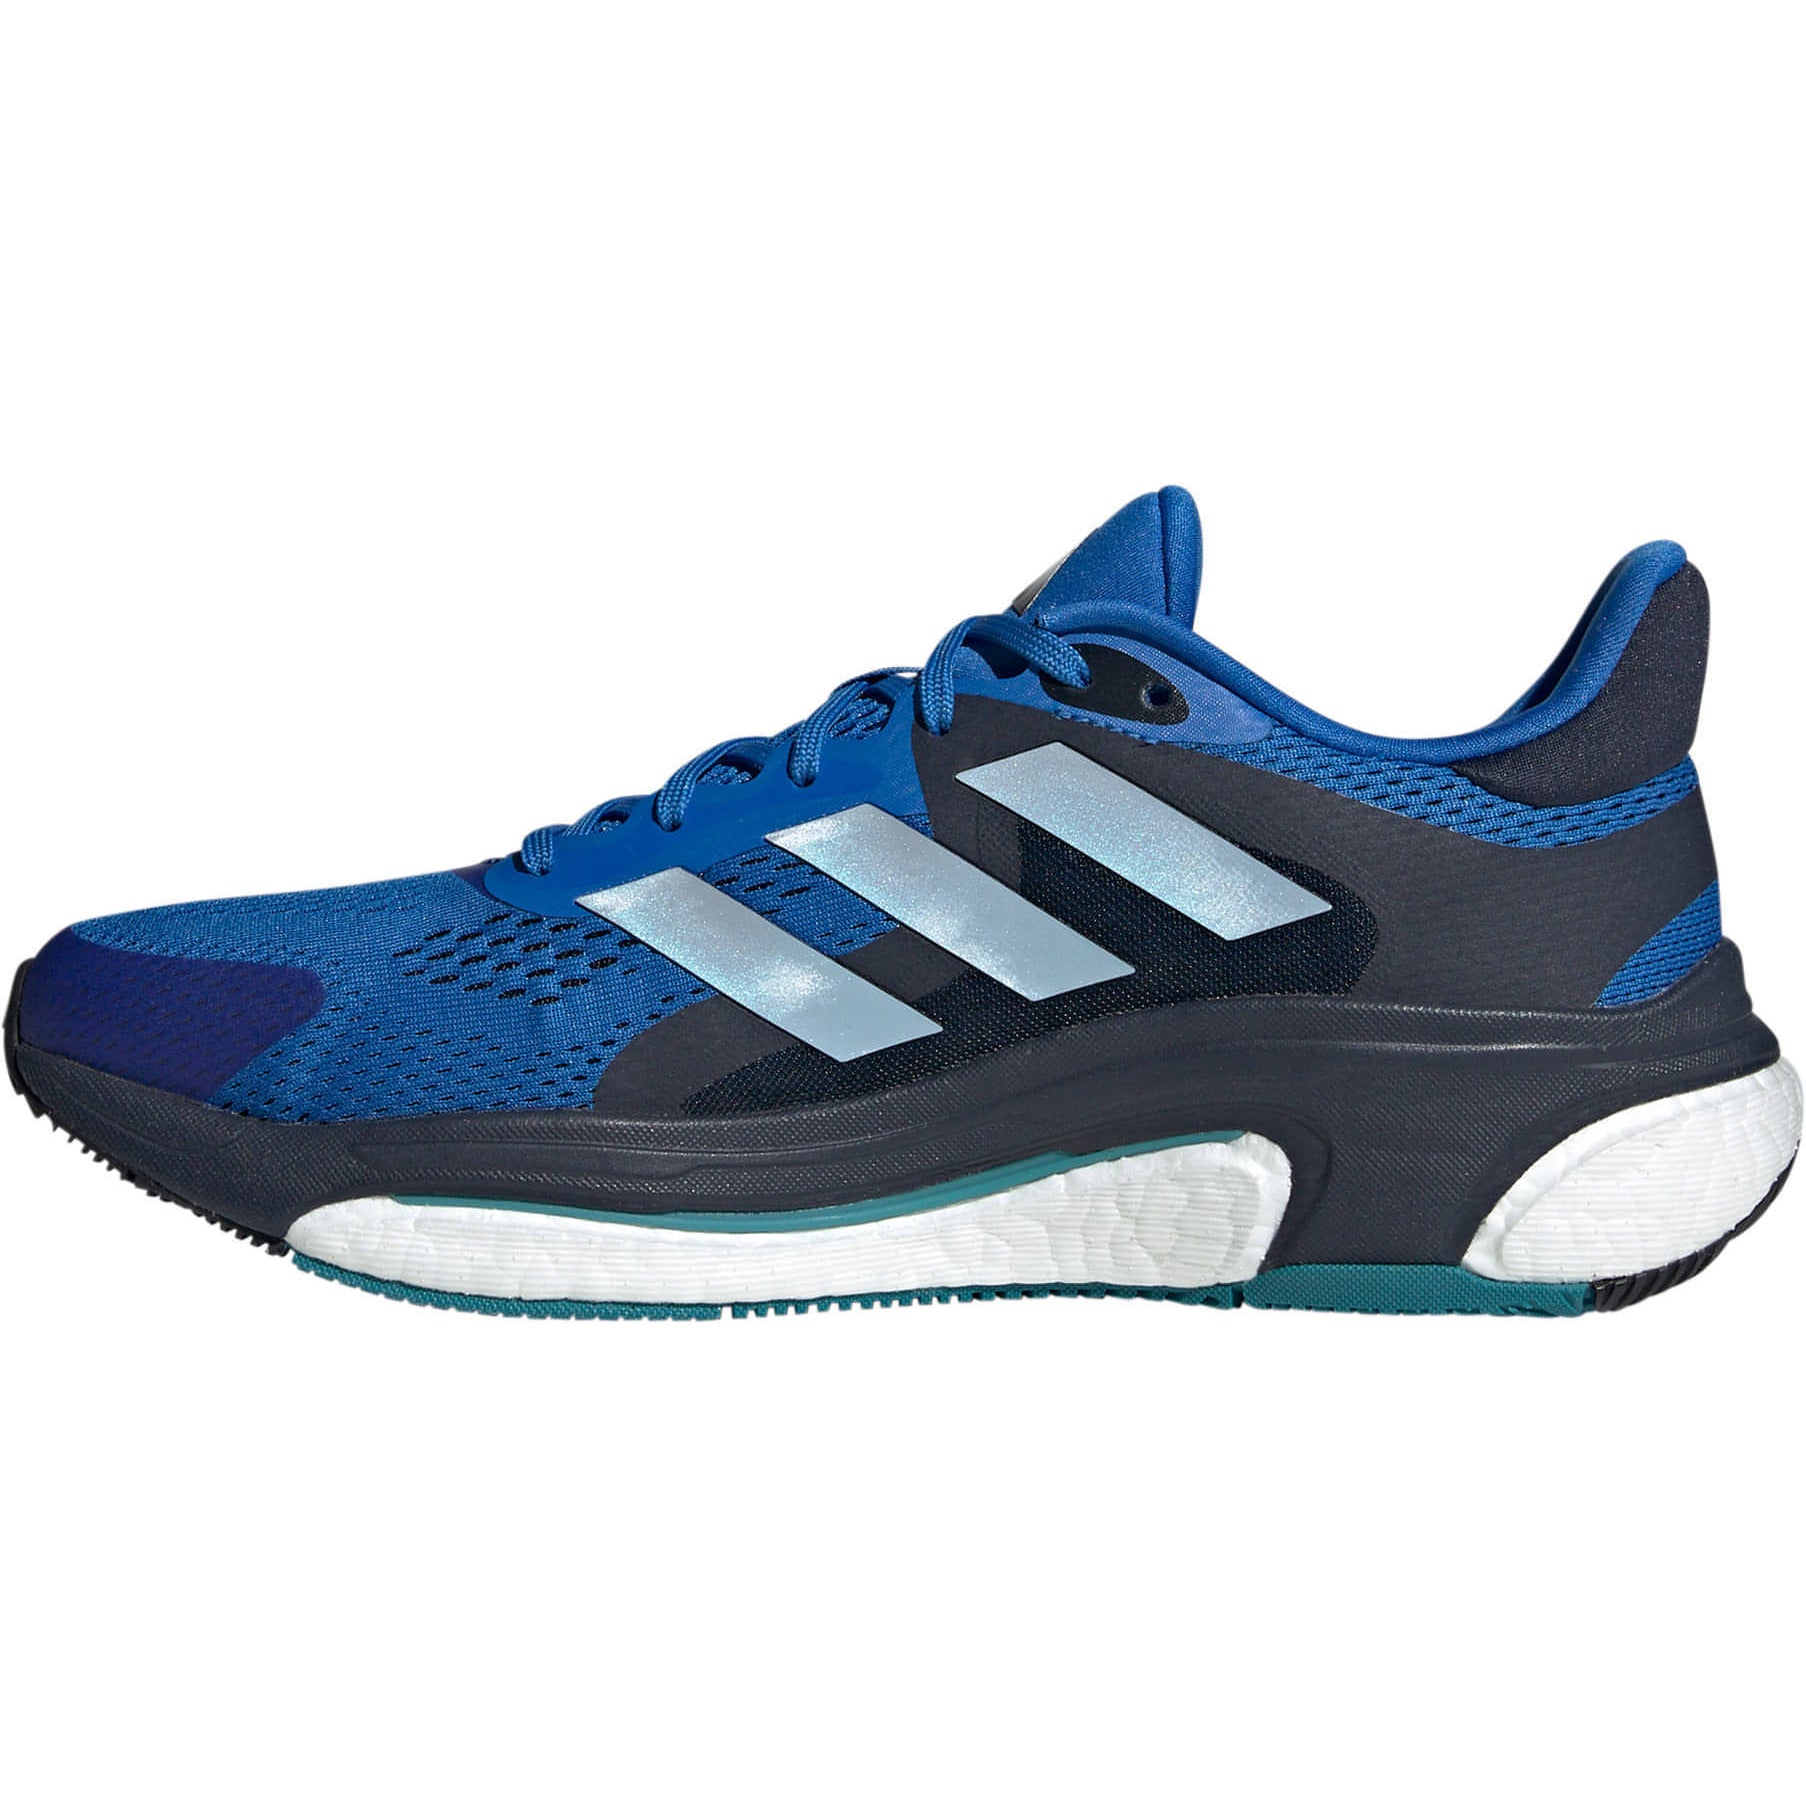 Adidas Solar Control Shoes Hp9647 Inside - Side View